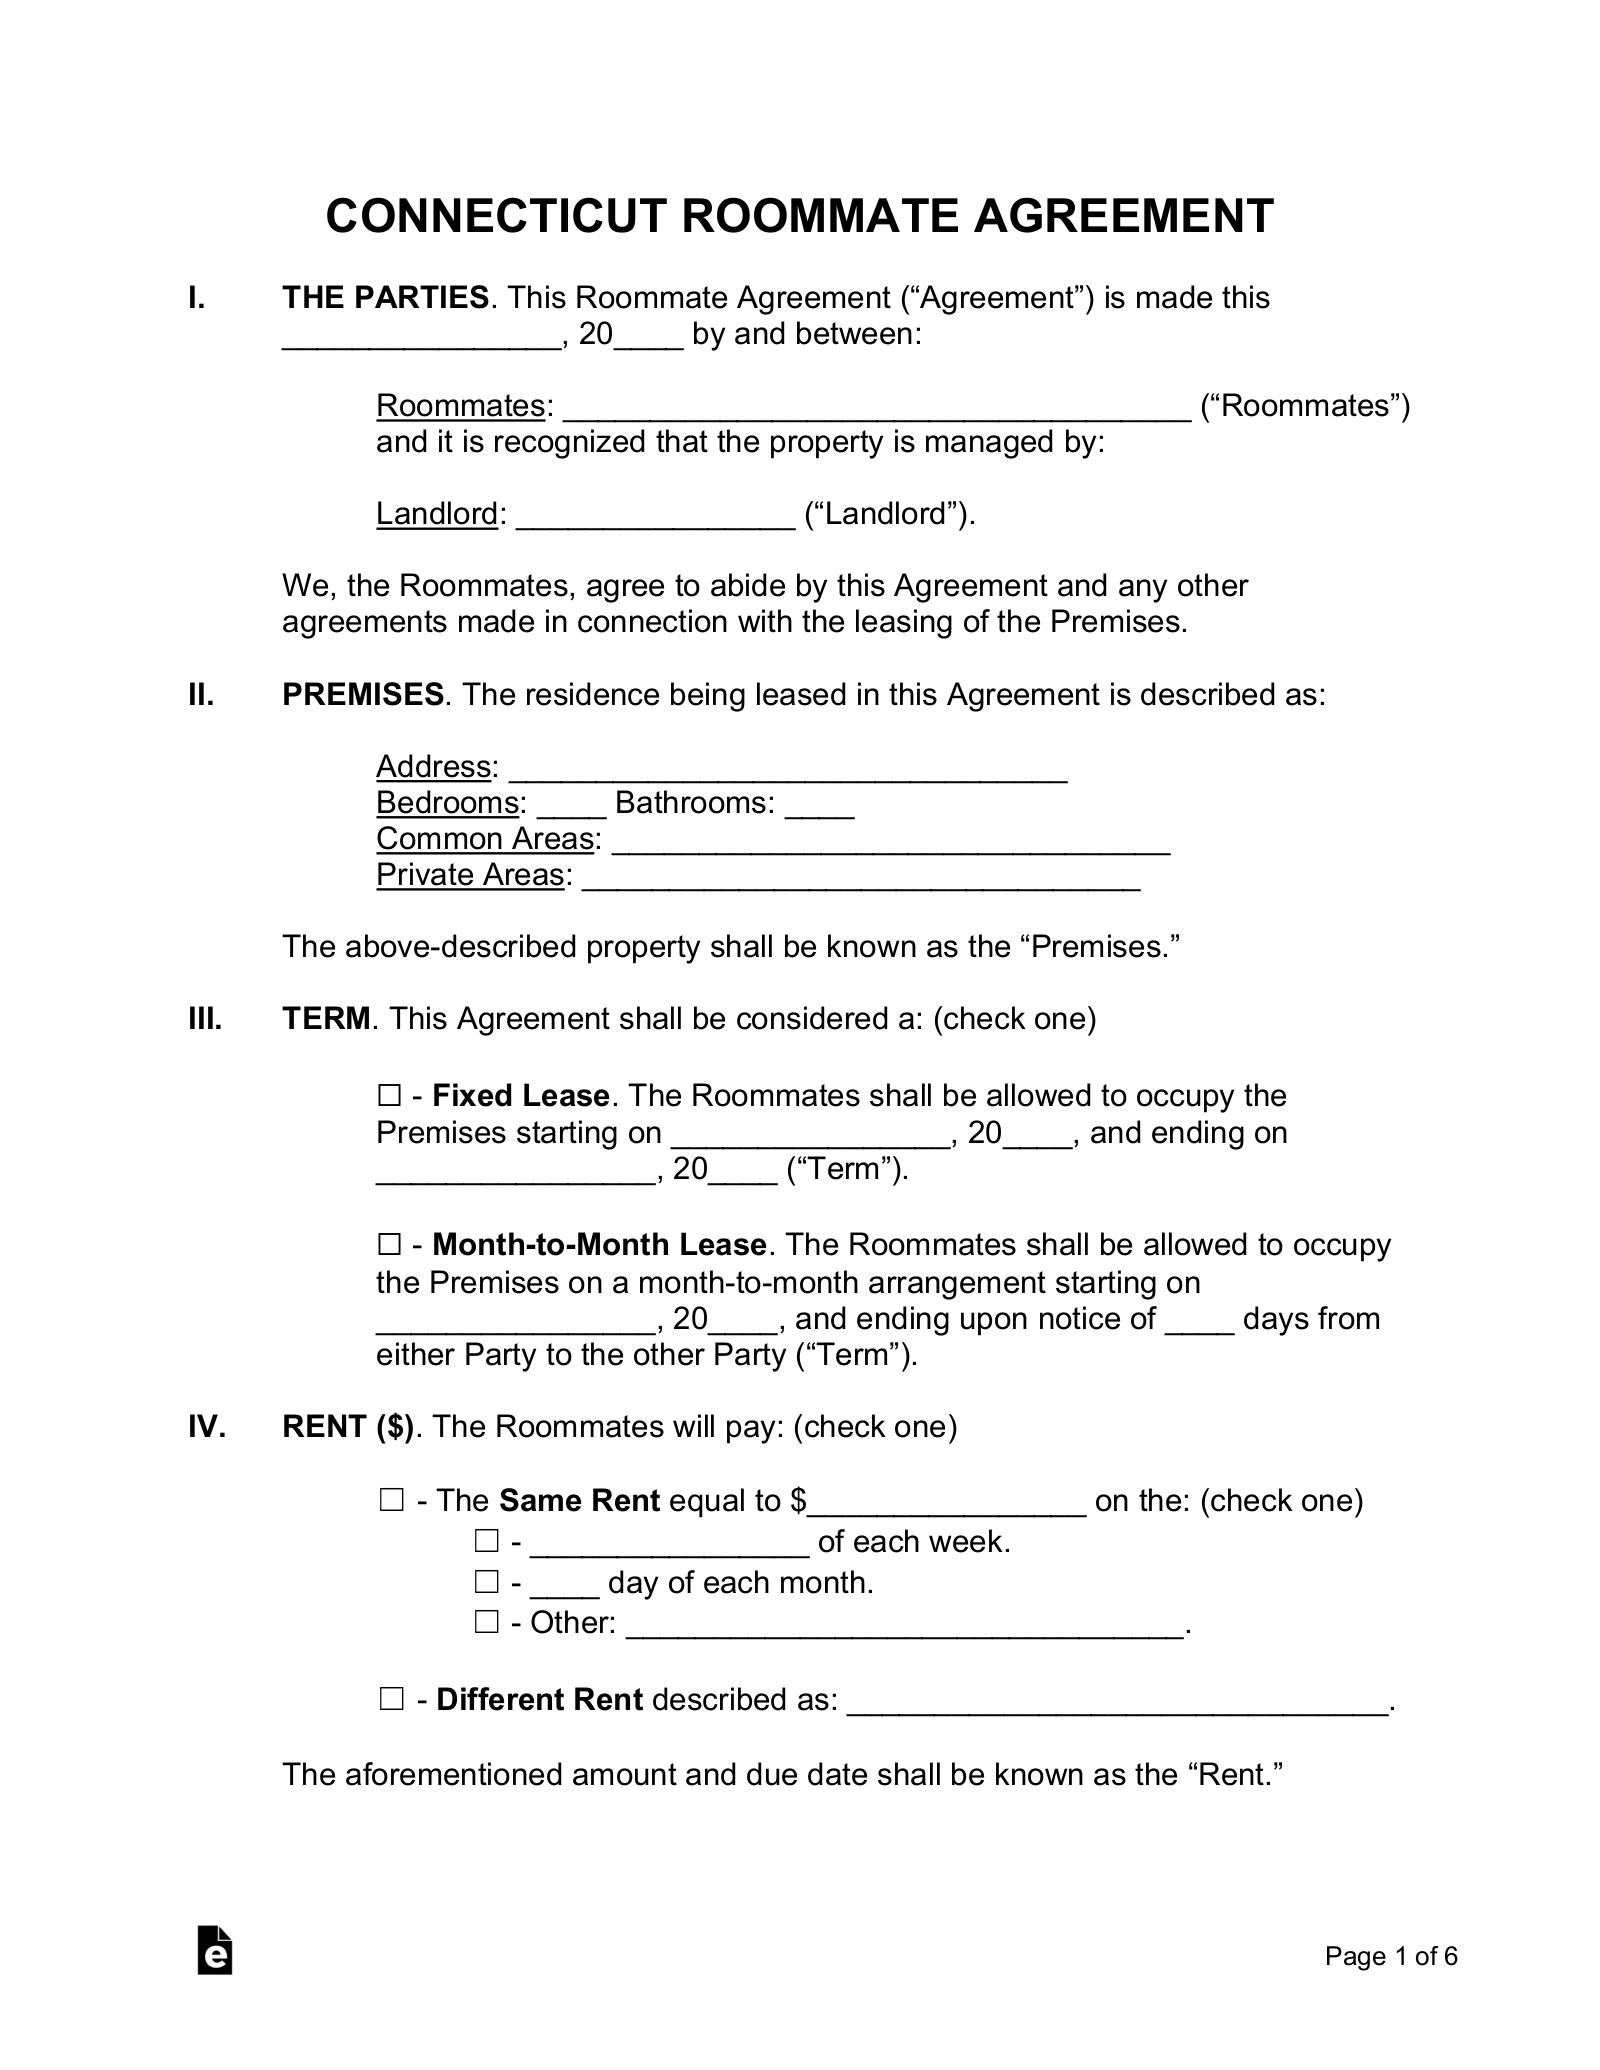 Connecticut Roommate Agreement Template